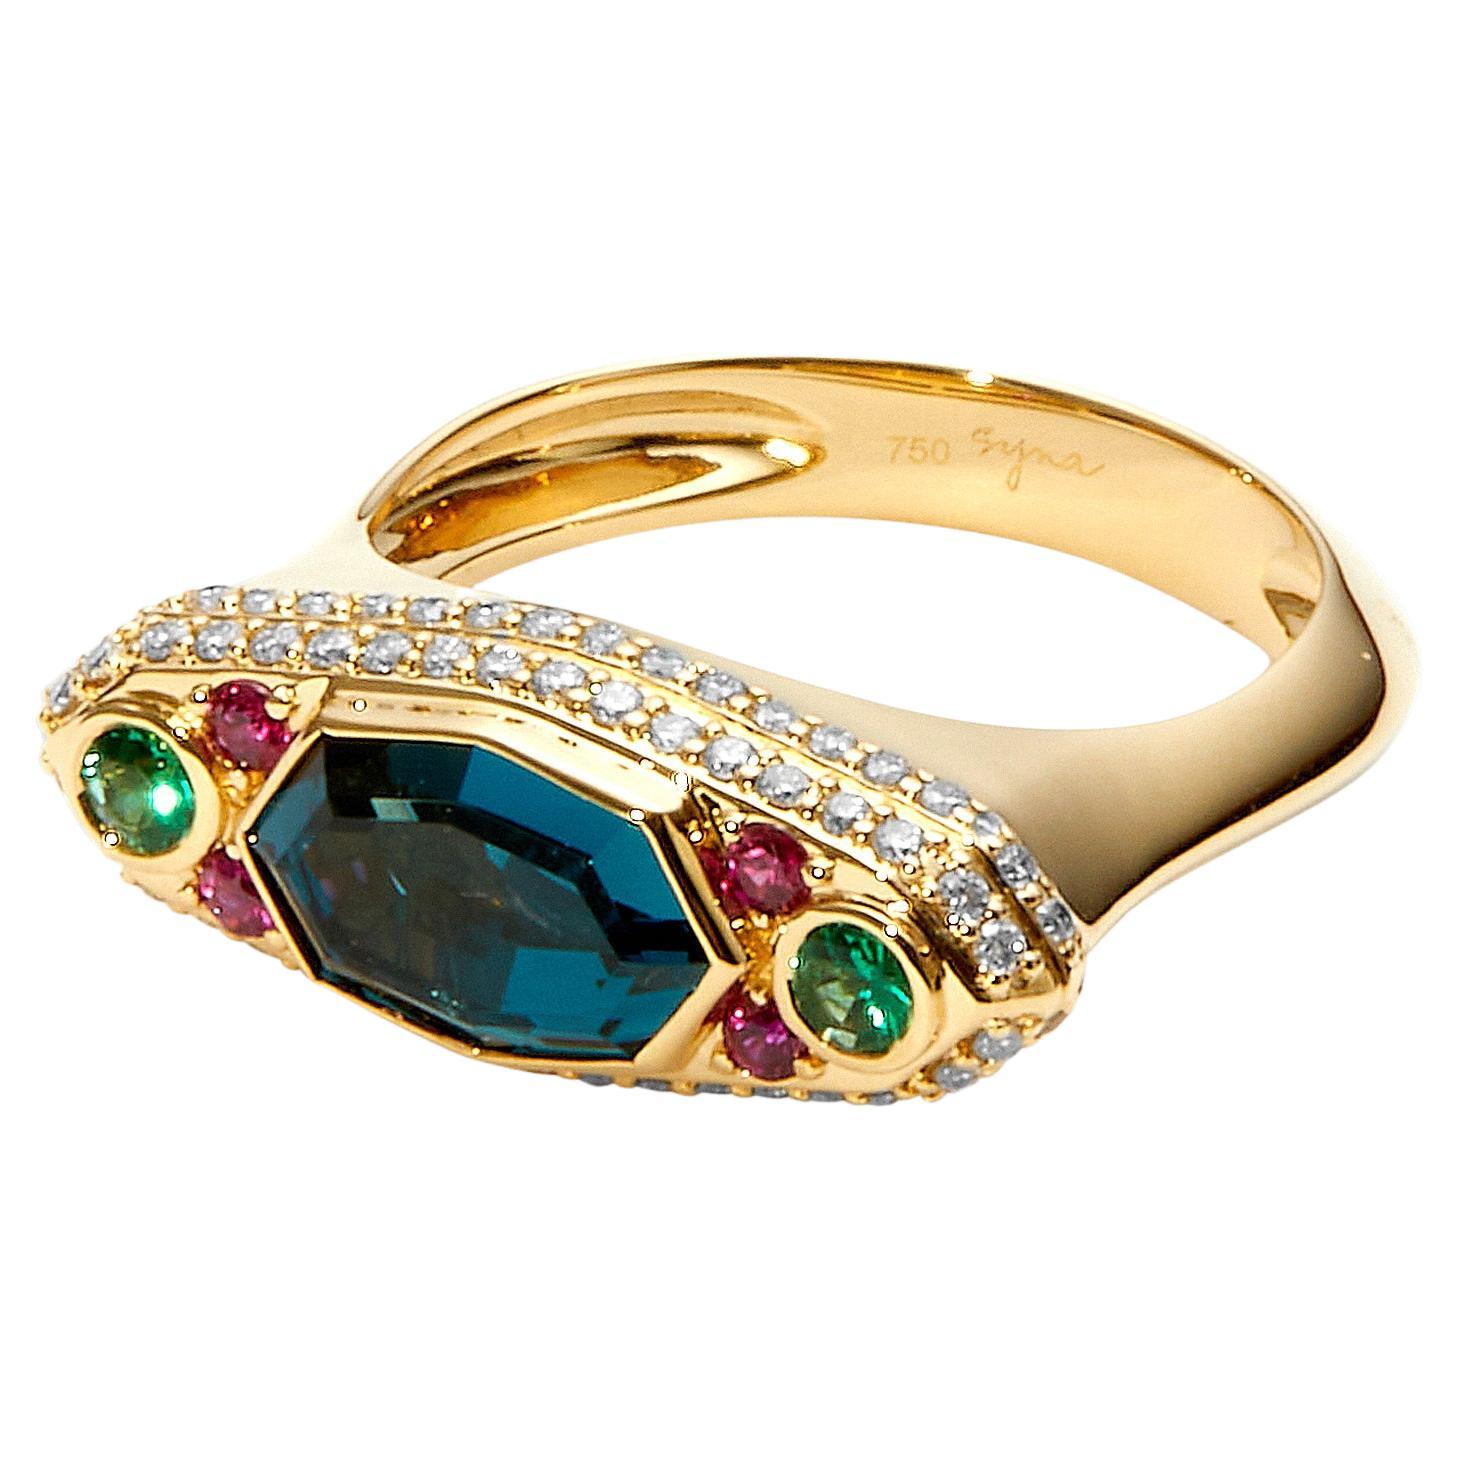 Syna Yellow Gold London Blue Topaz, Emeralds, Rubies and Diamond Ring